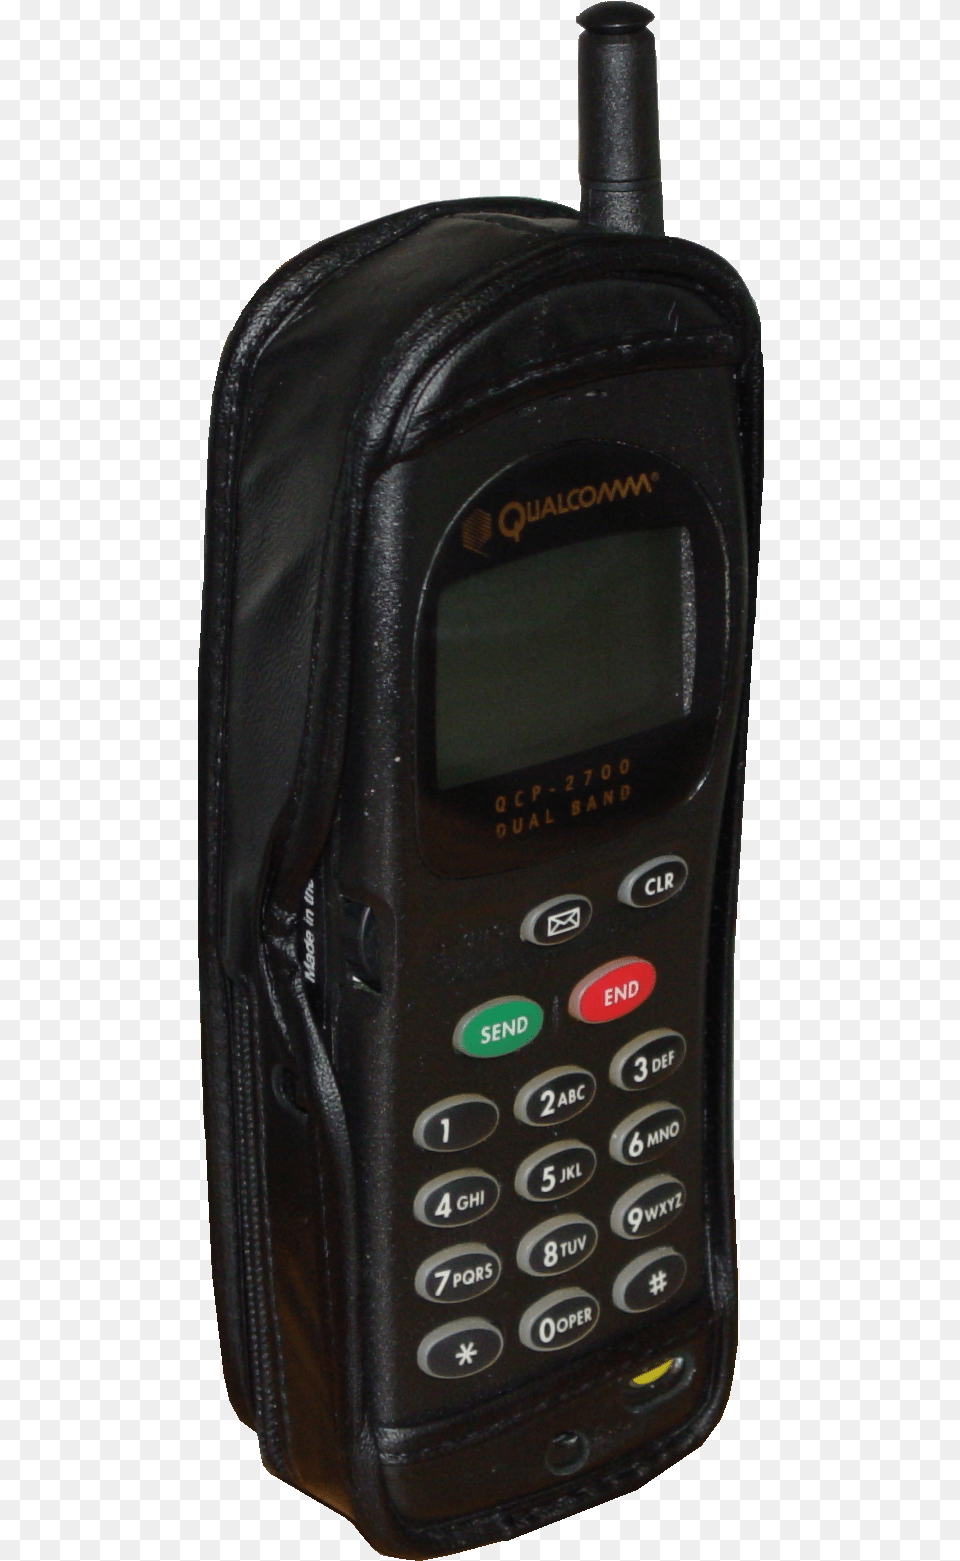 Qualcomm Qcp 2700 Phone Oldest Phone Vs Newest Phone, Electronics, Mobile Phone Png Image